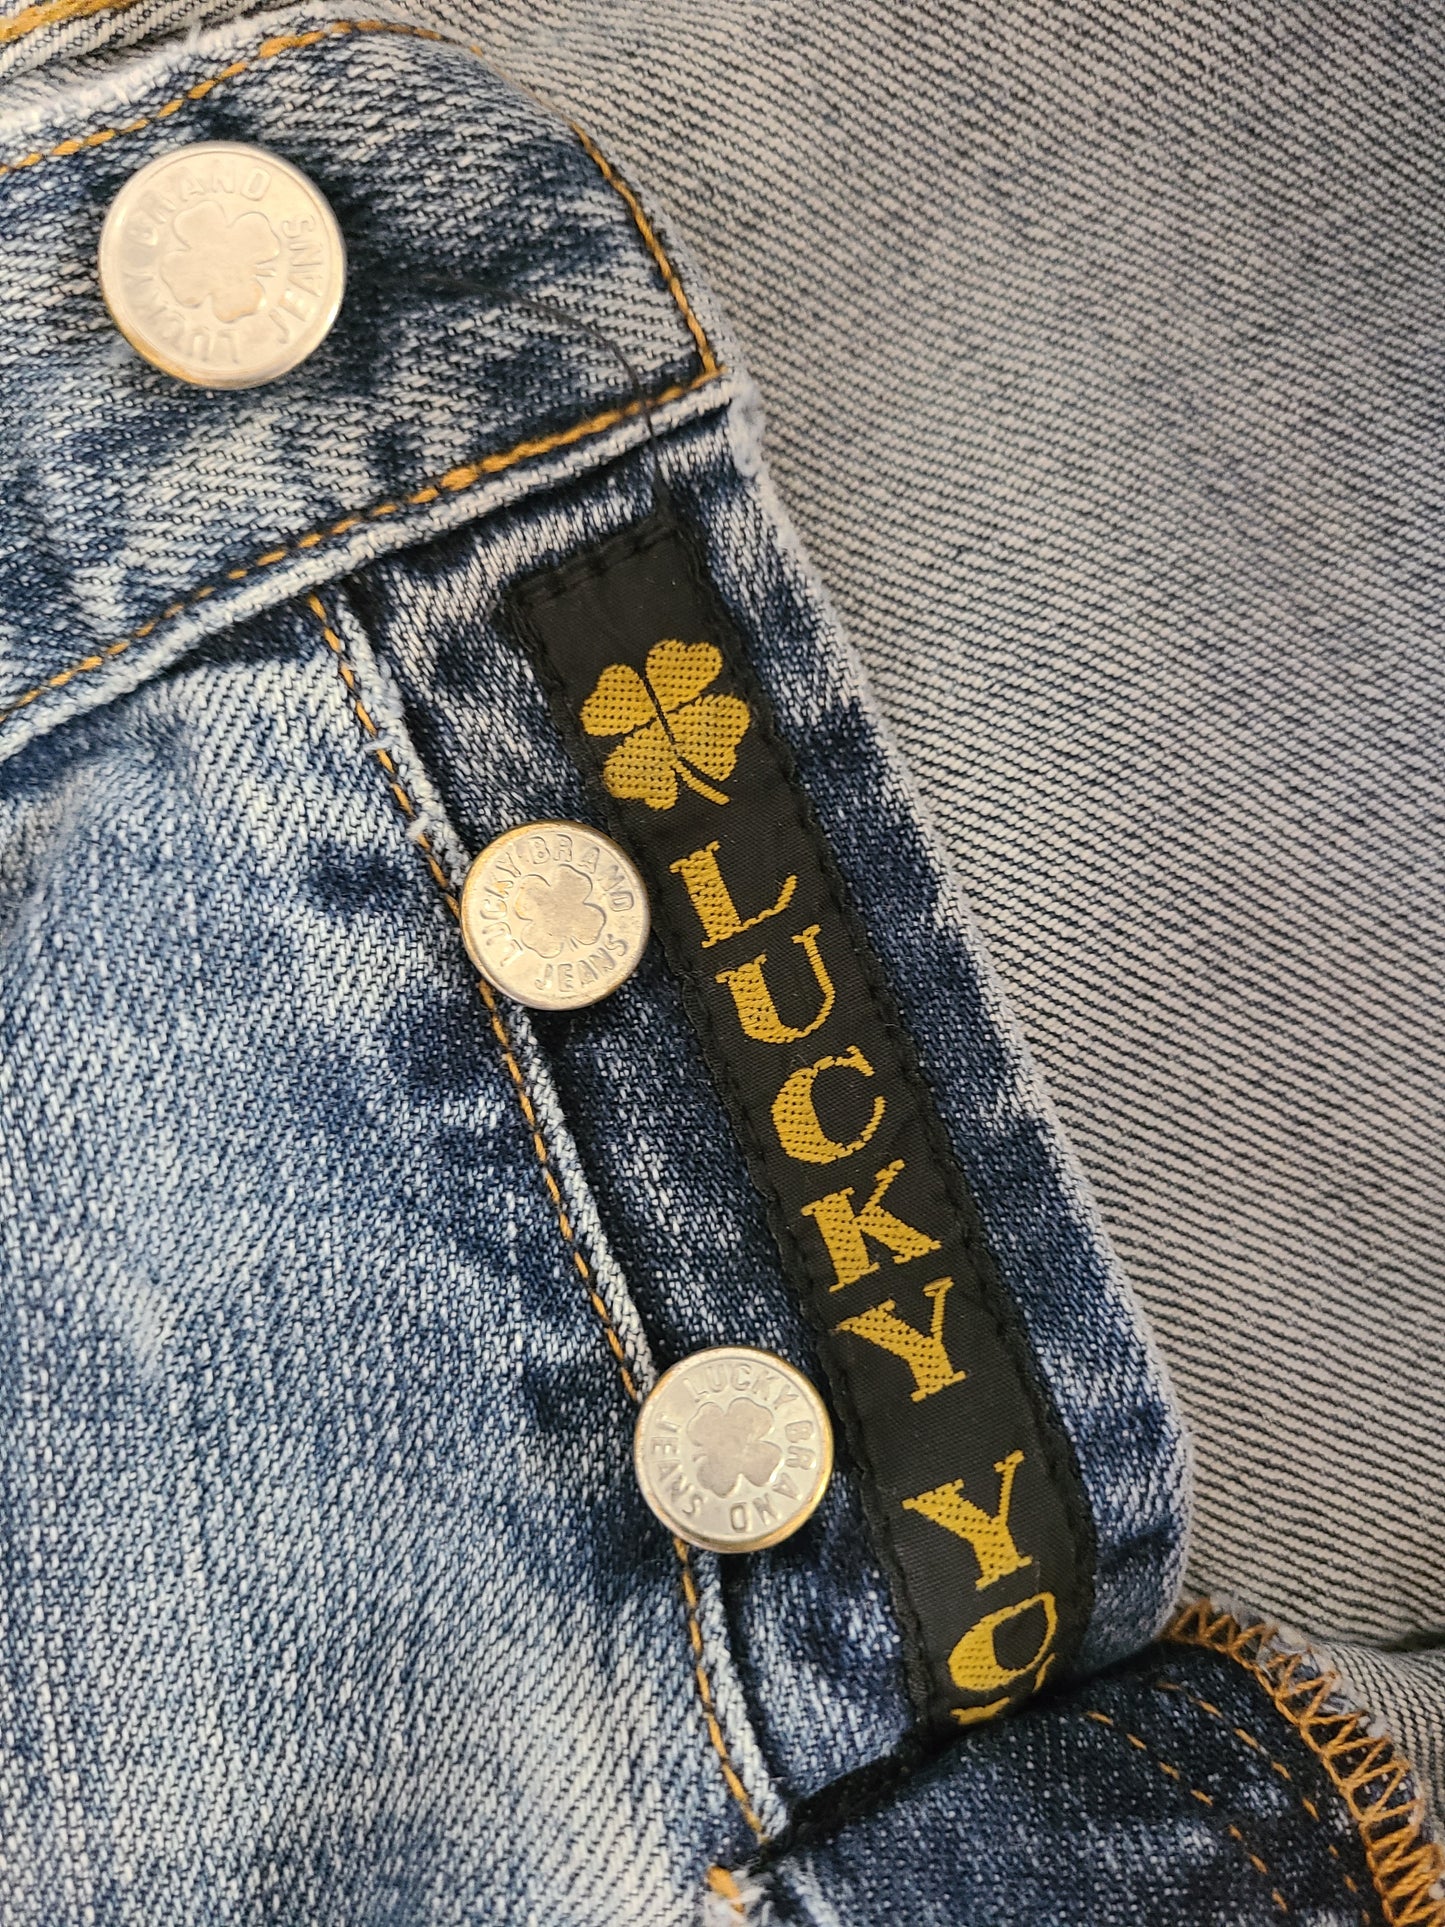 The Thrashed Lowrider Y2K American Made Lucky Brand Dungarees 30